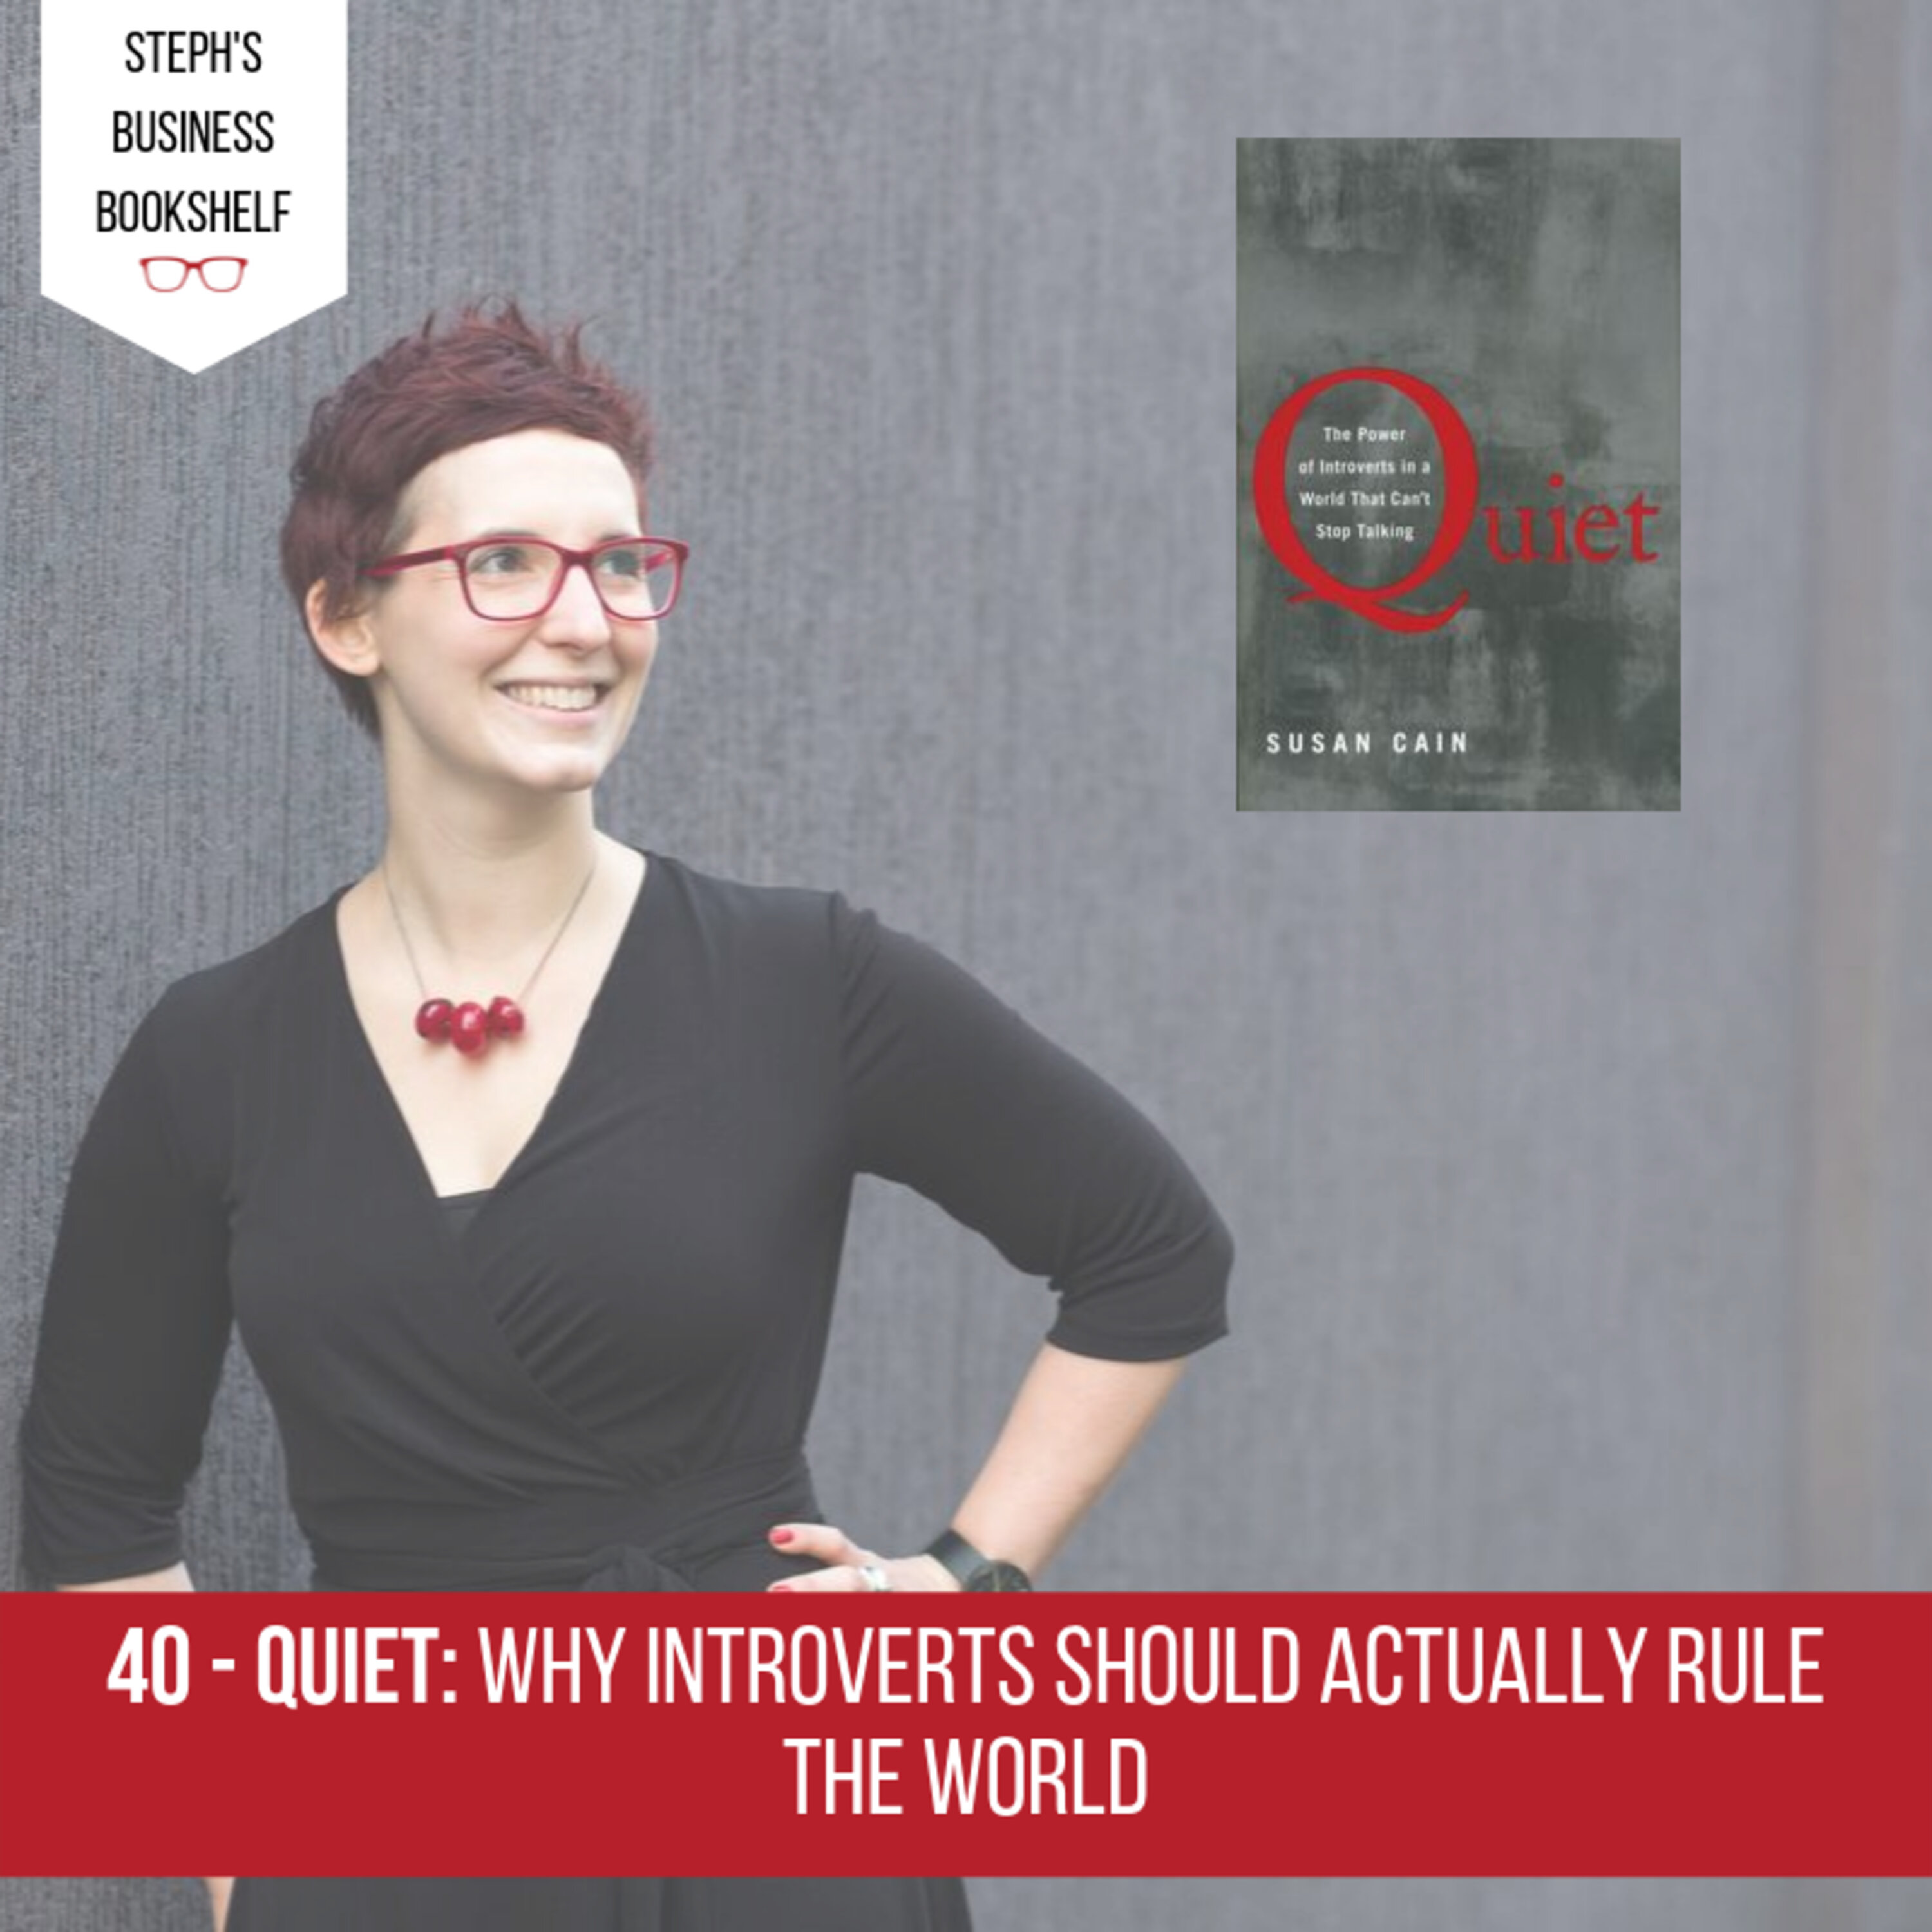 Quiet by Susan Cain: Why introverts should actually rule the world